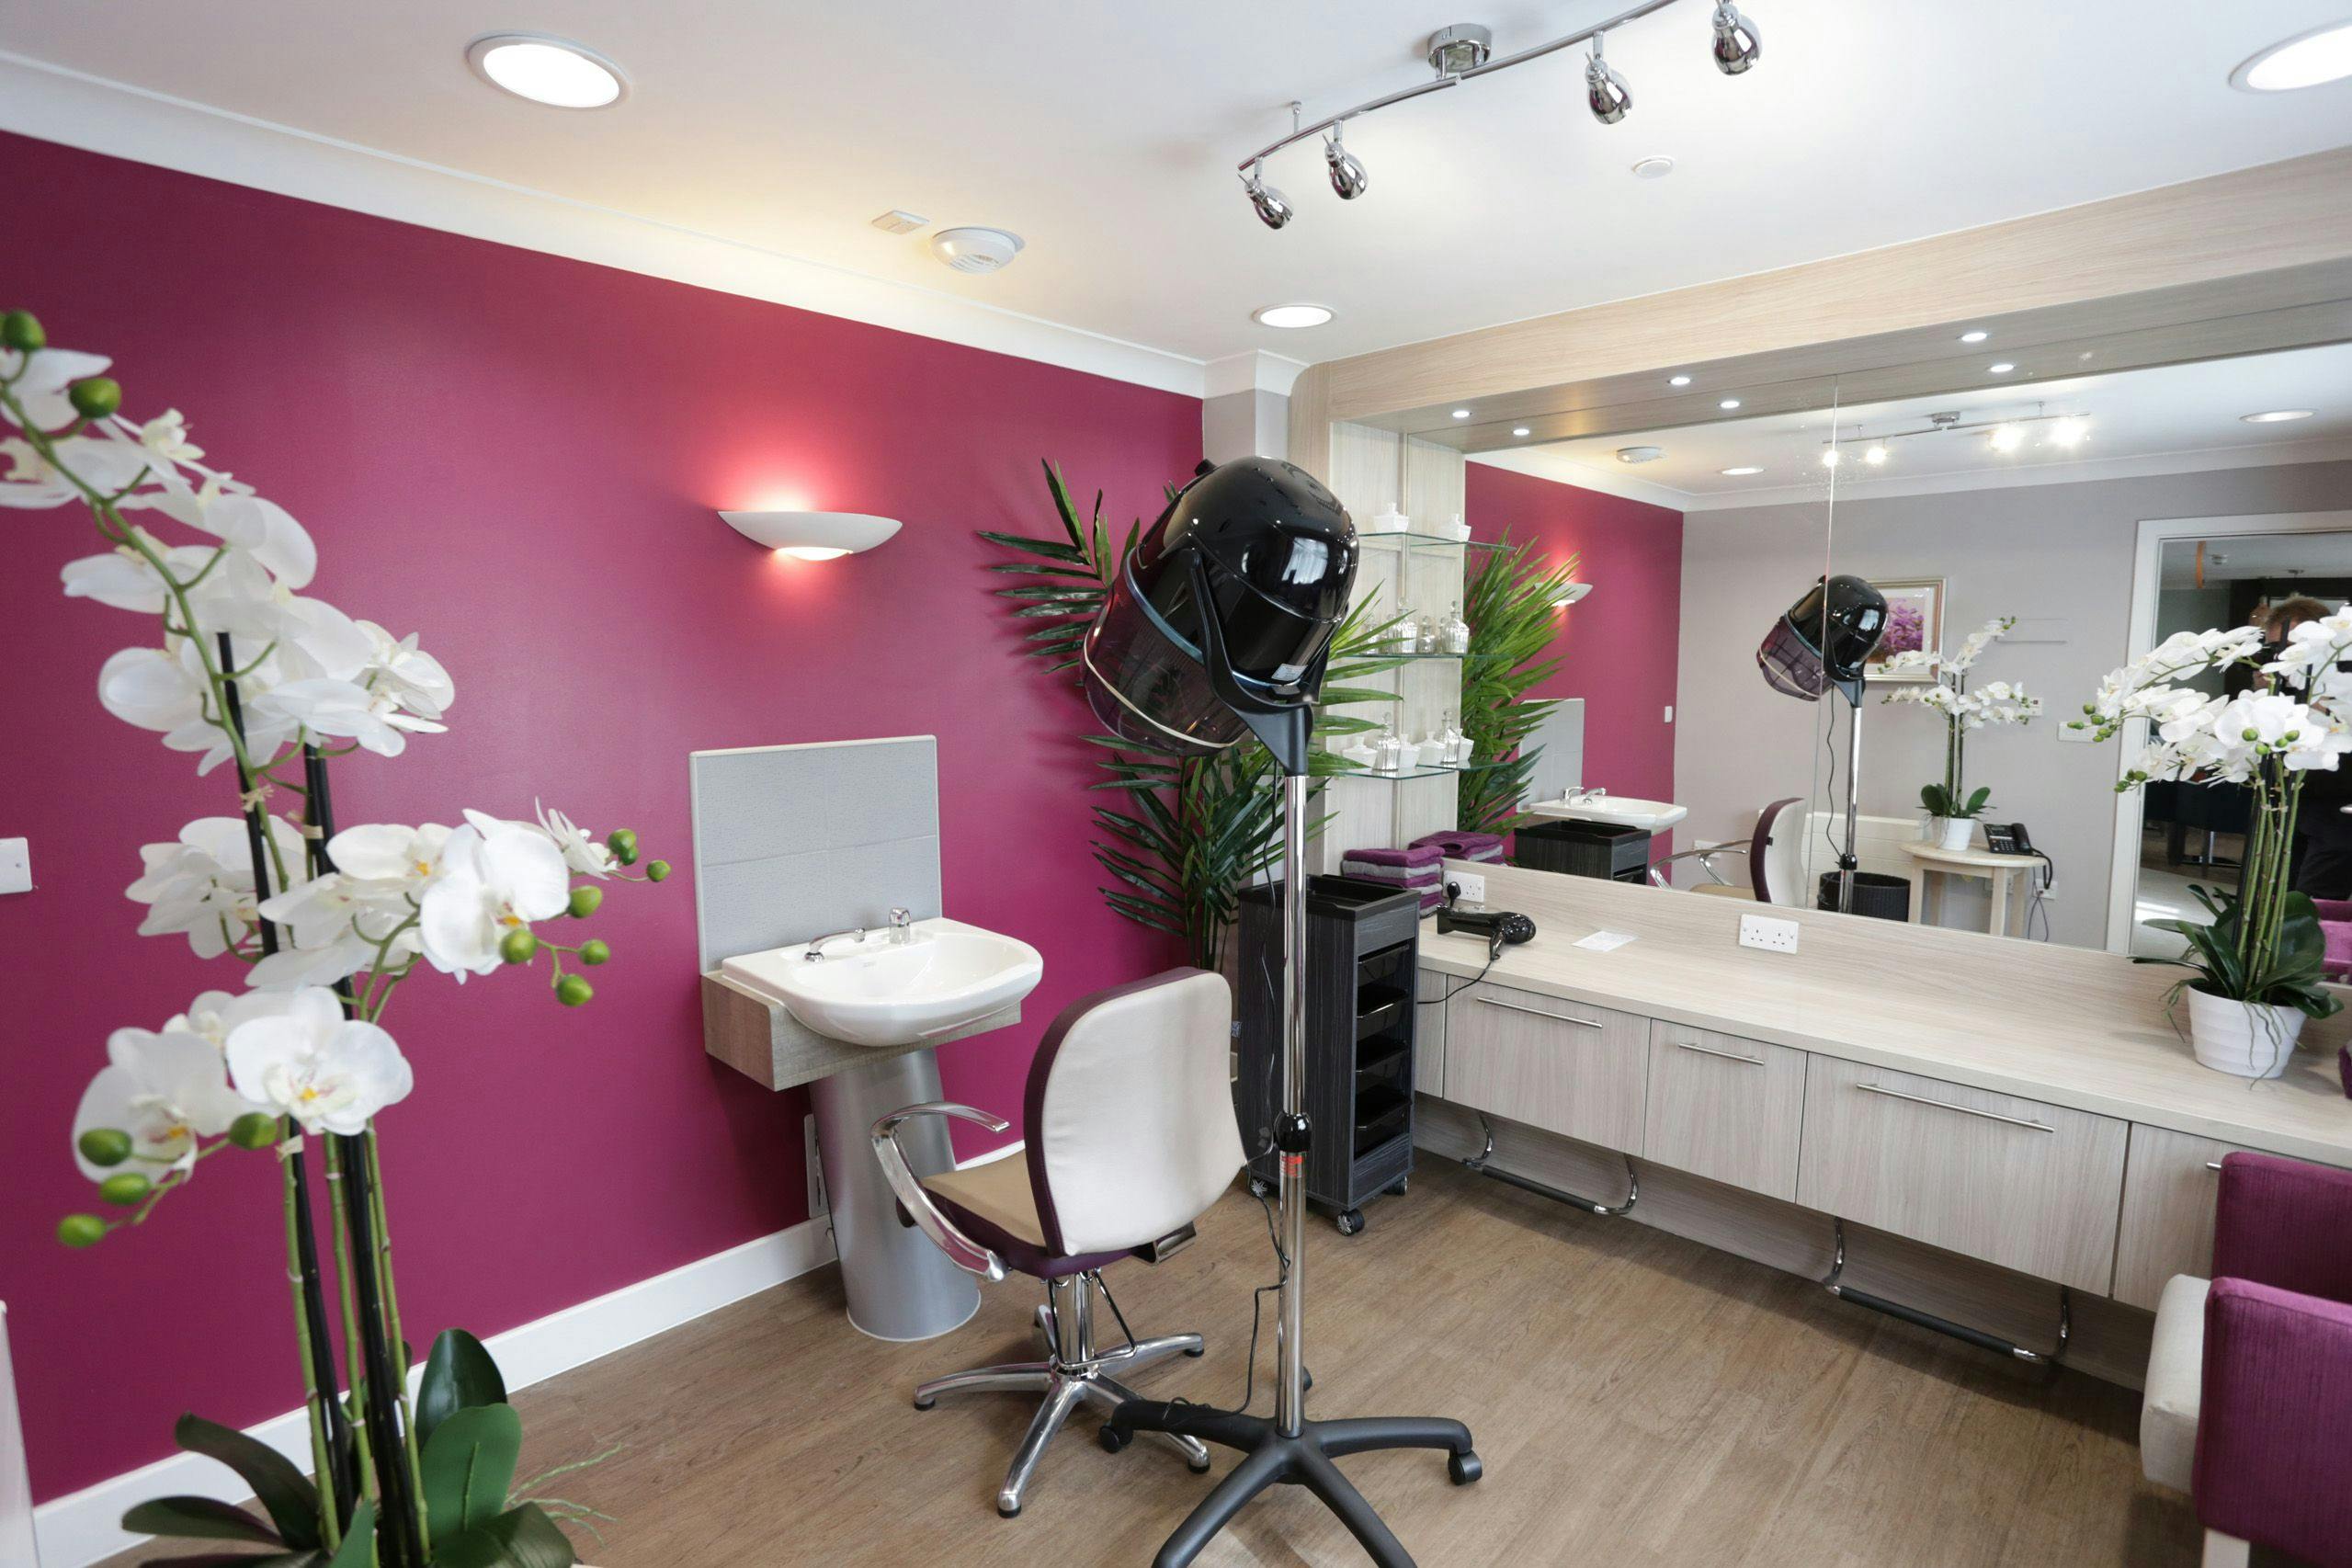 Salon at Grace Care Home in Thornbury, South Gloucestershire